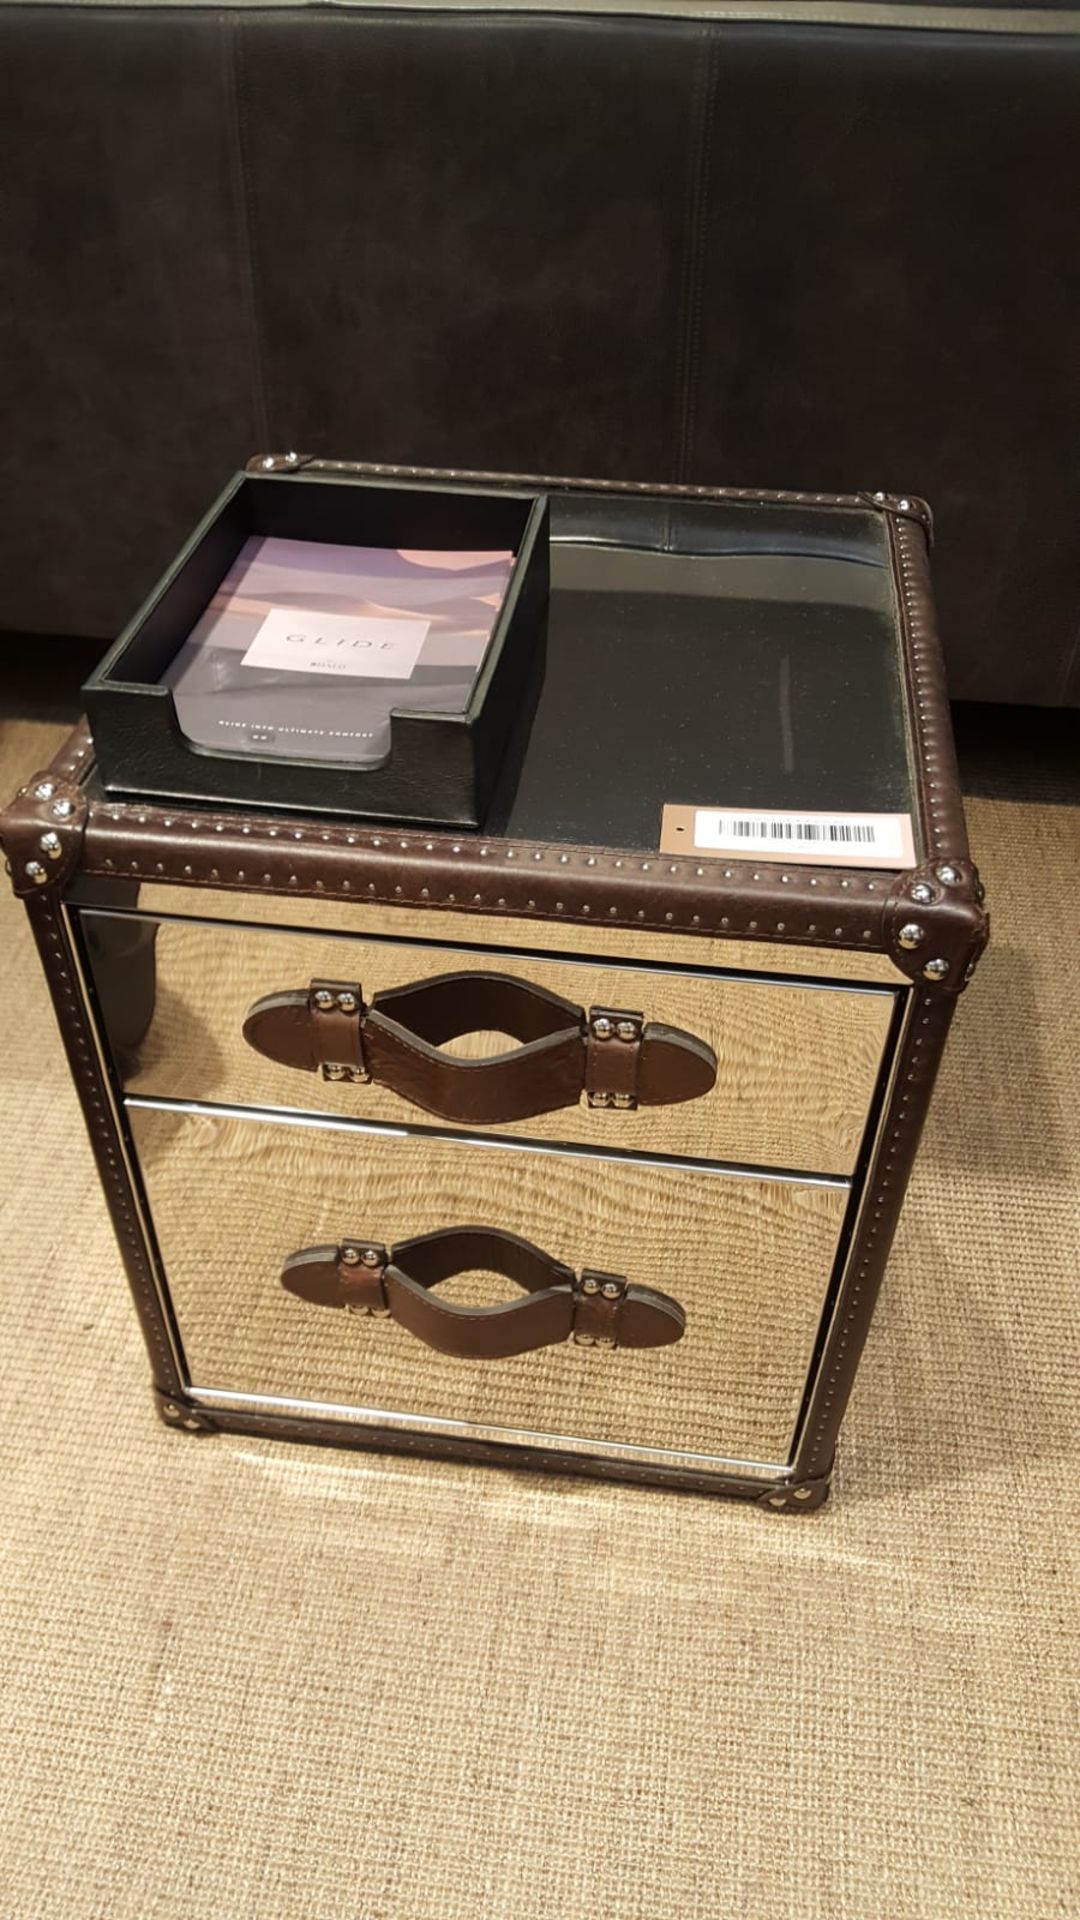 Sherborne Side Table Shiny Steel A Contemporary Take On Classic Steamer Trunk Shapes And Styles 45 X